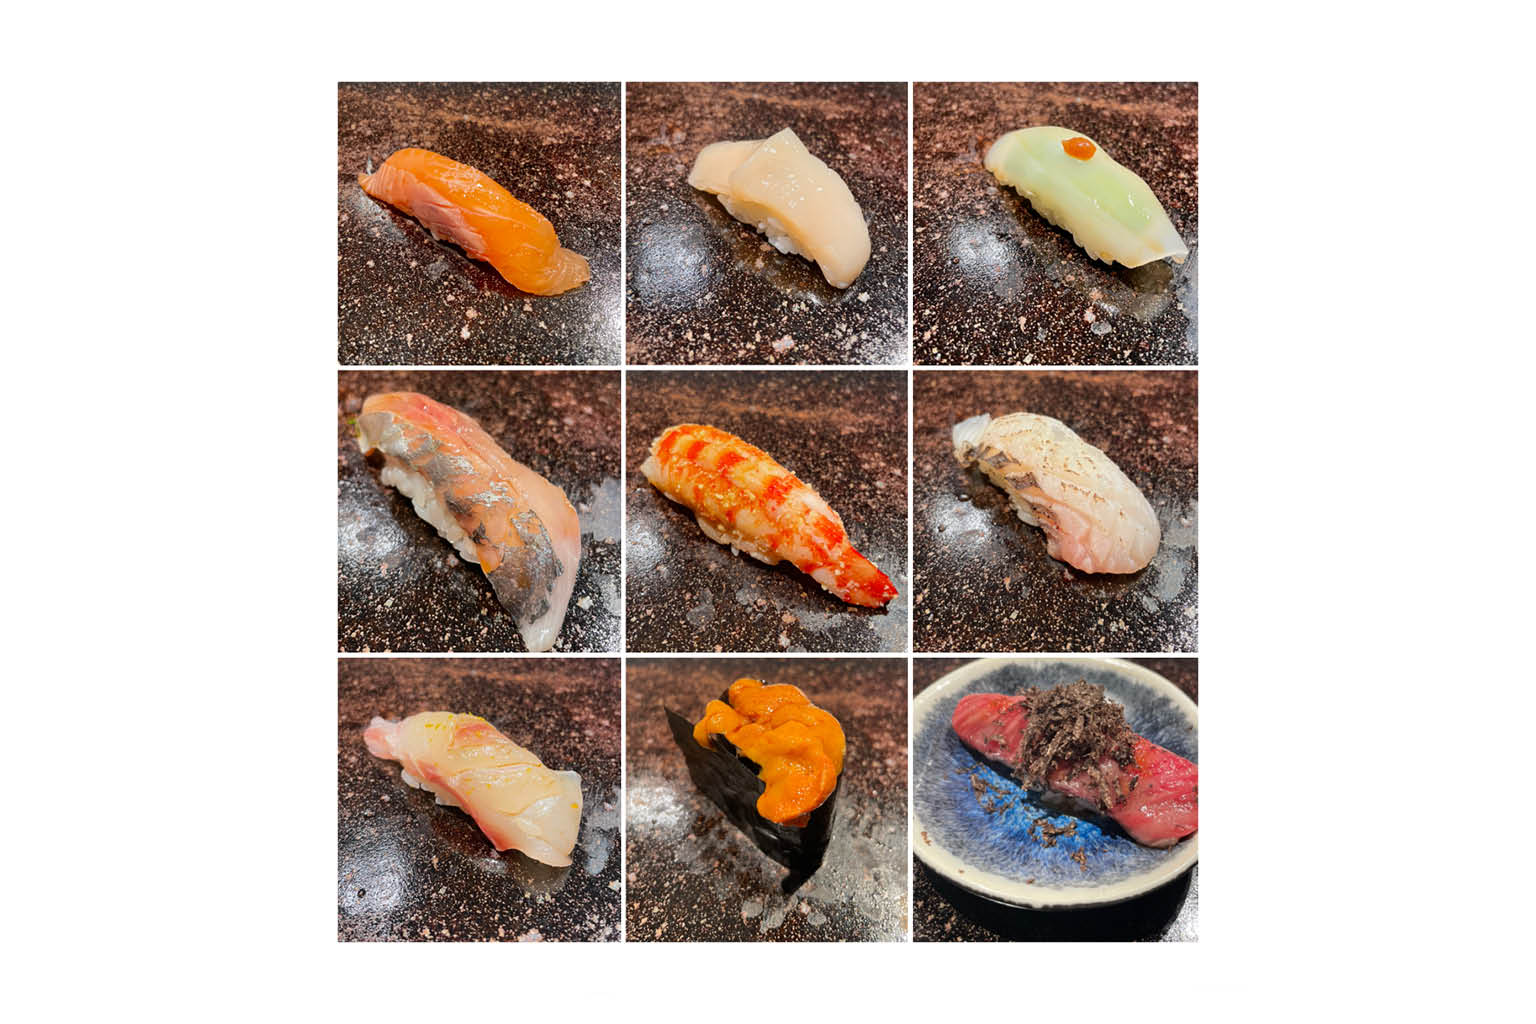 A few selections from the evening’s omakase.